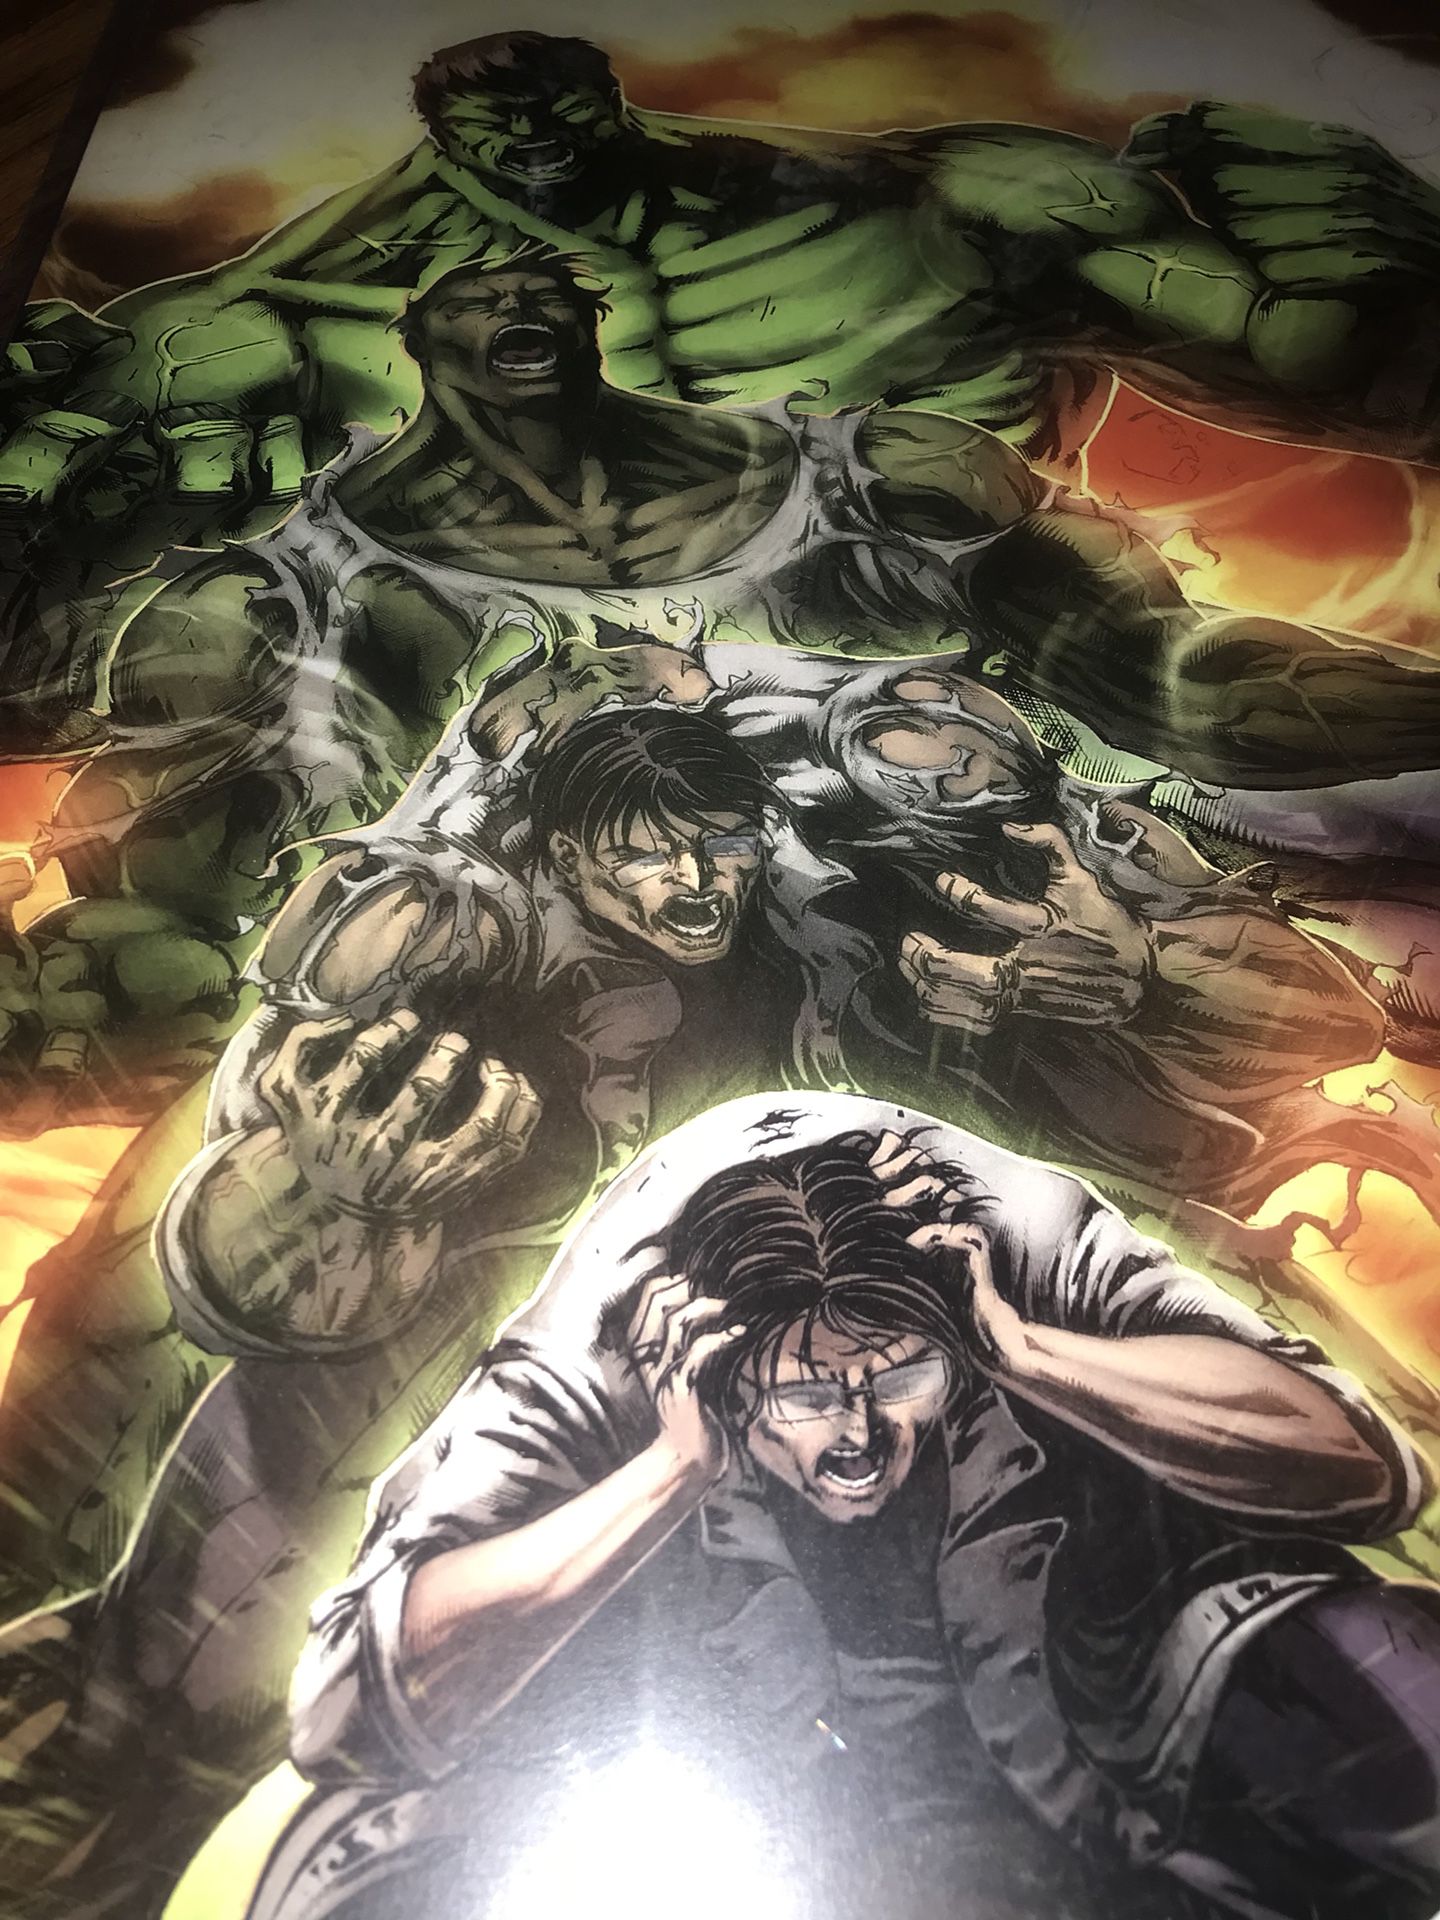 Incredible Hulk 11x17 anime art print comes in a top loader case